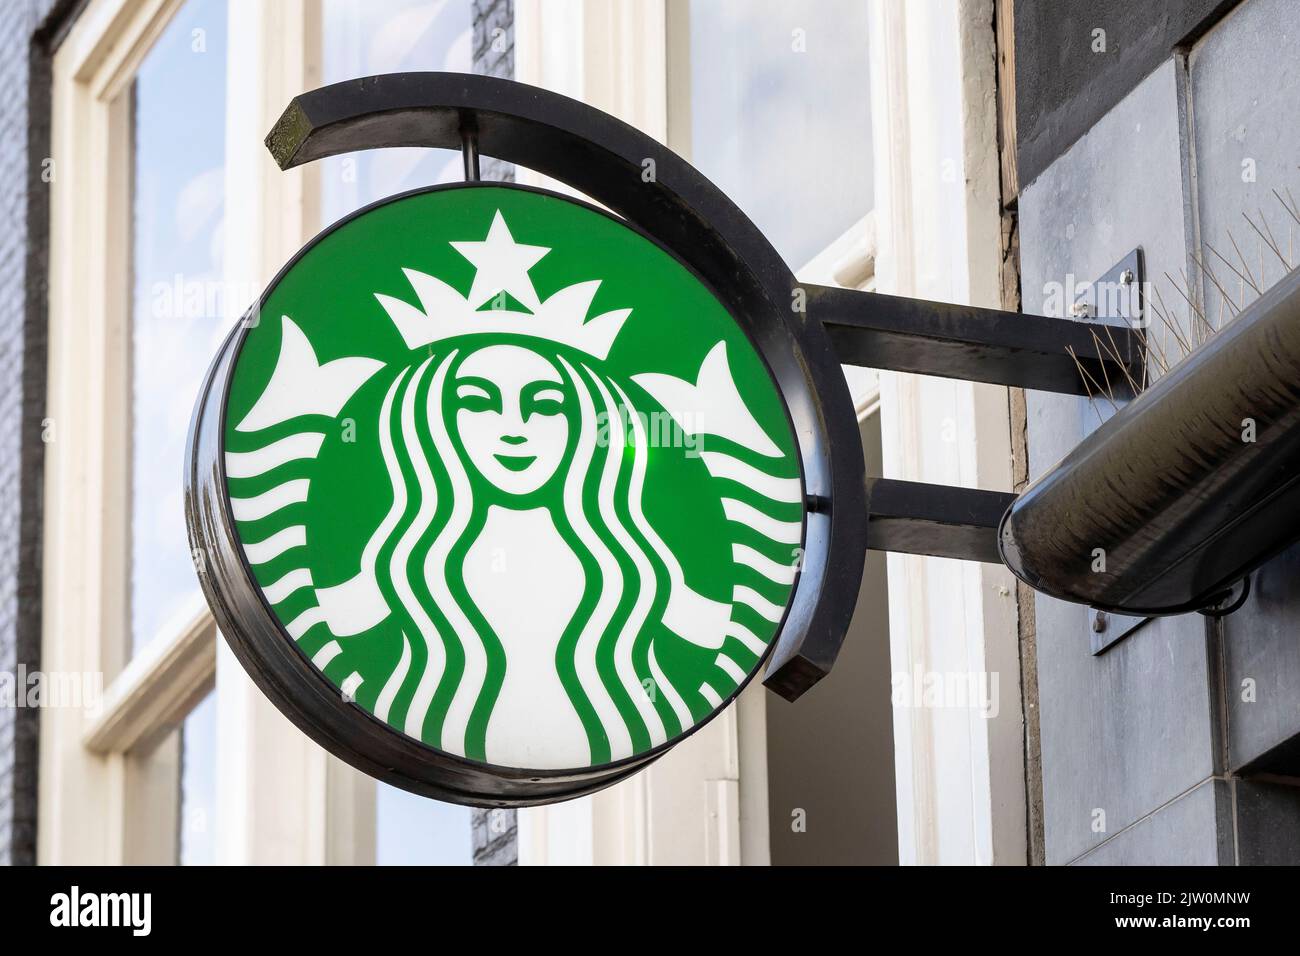 A close-up of a Starbucks coffee shop sign in Amsterdam, Holland. Stock Photo